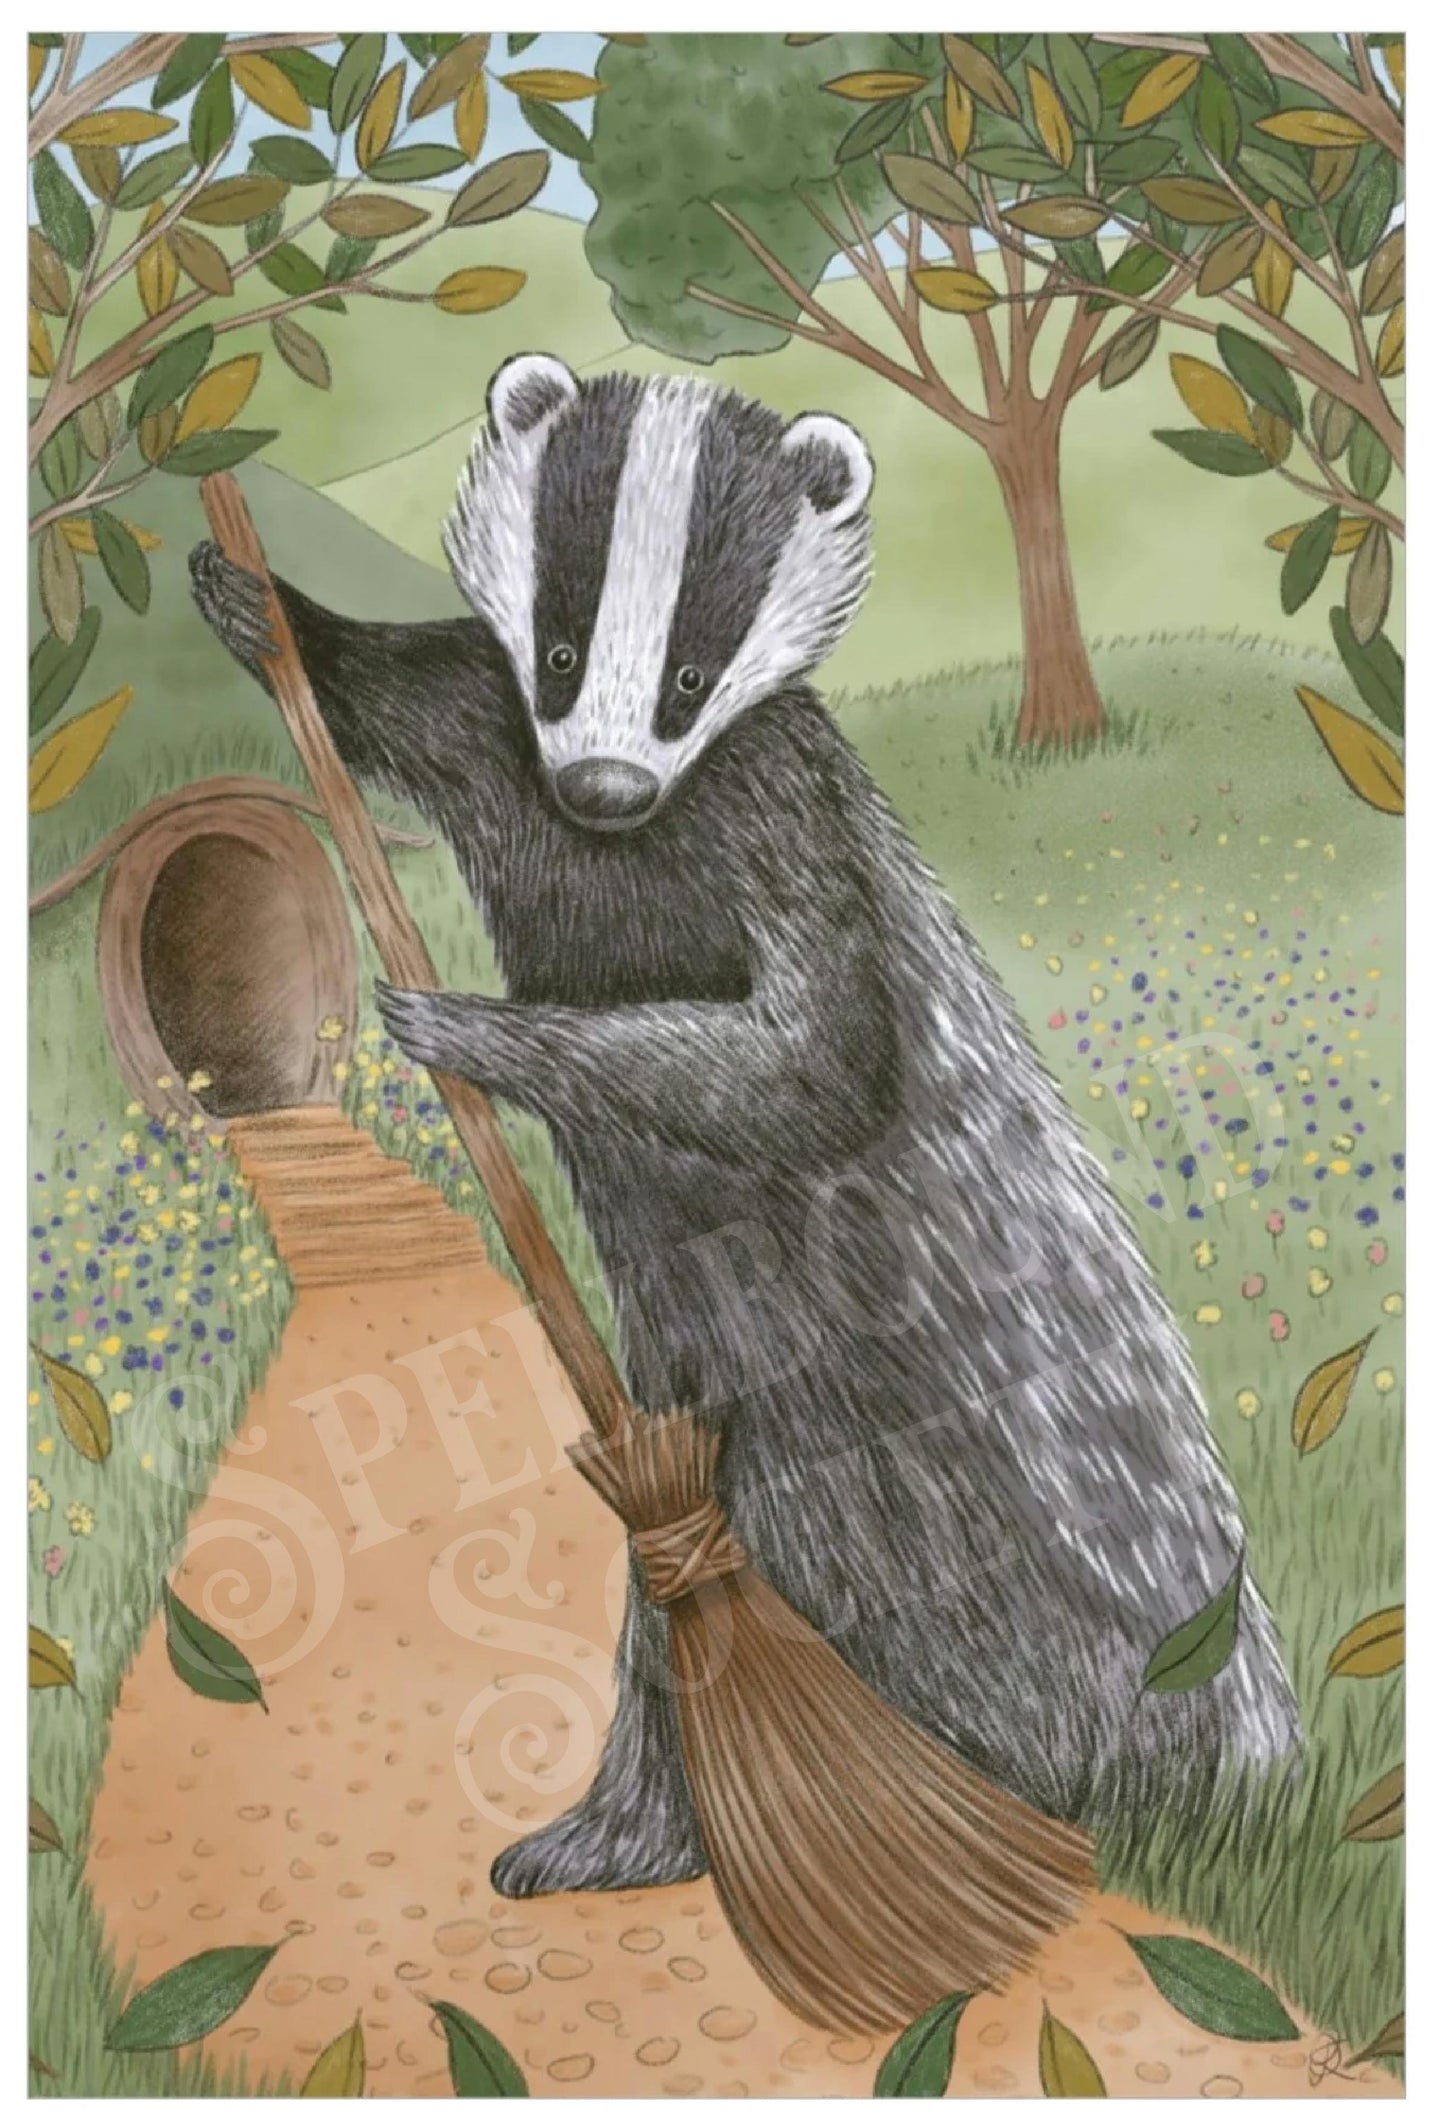 Willows Hedge - Badger Sweeping - 12"x18" Premium Matte Vertical Poster